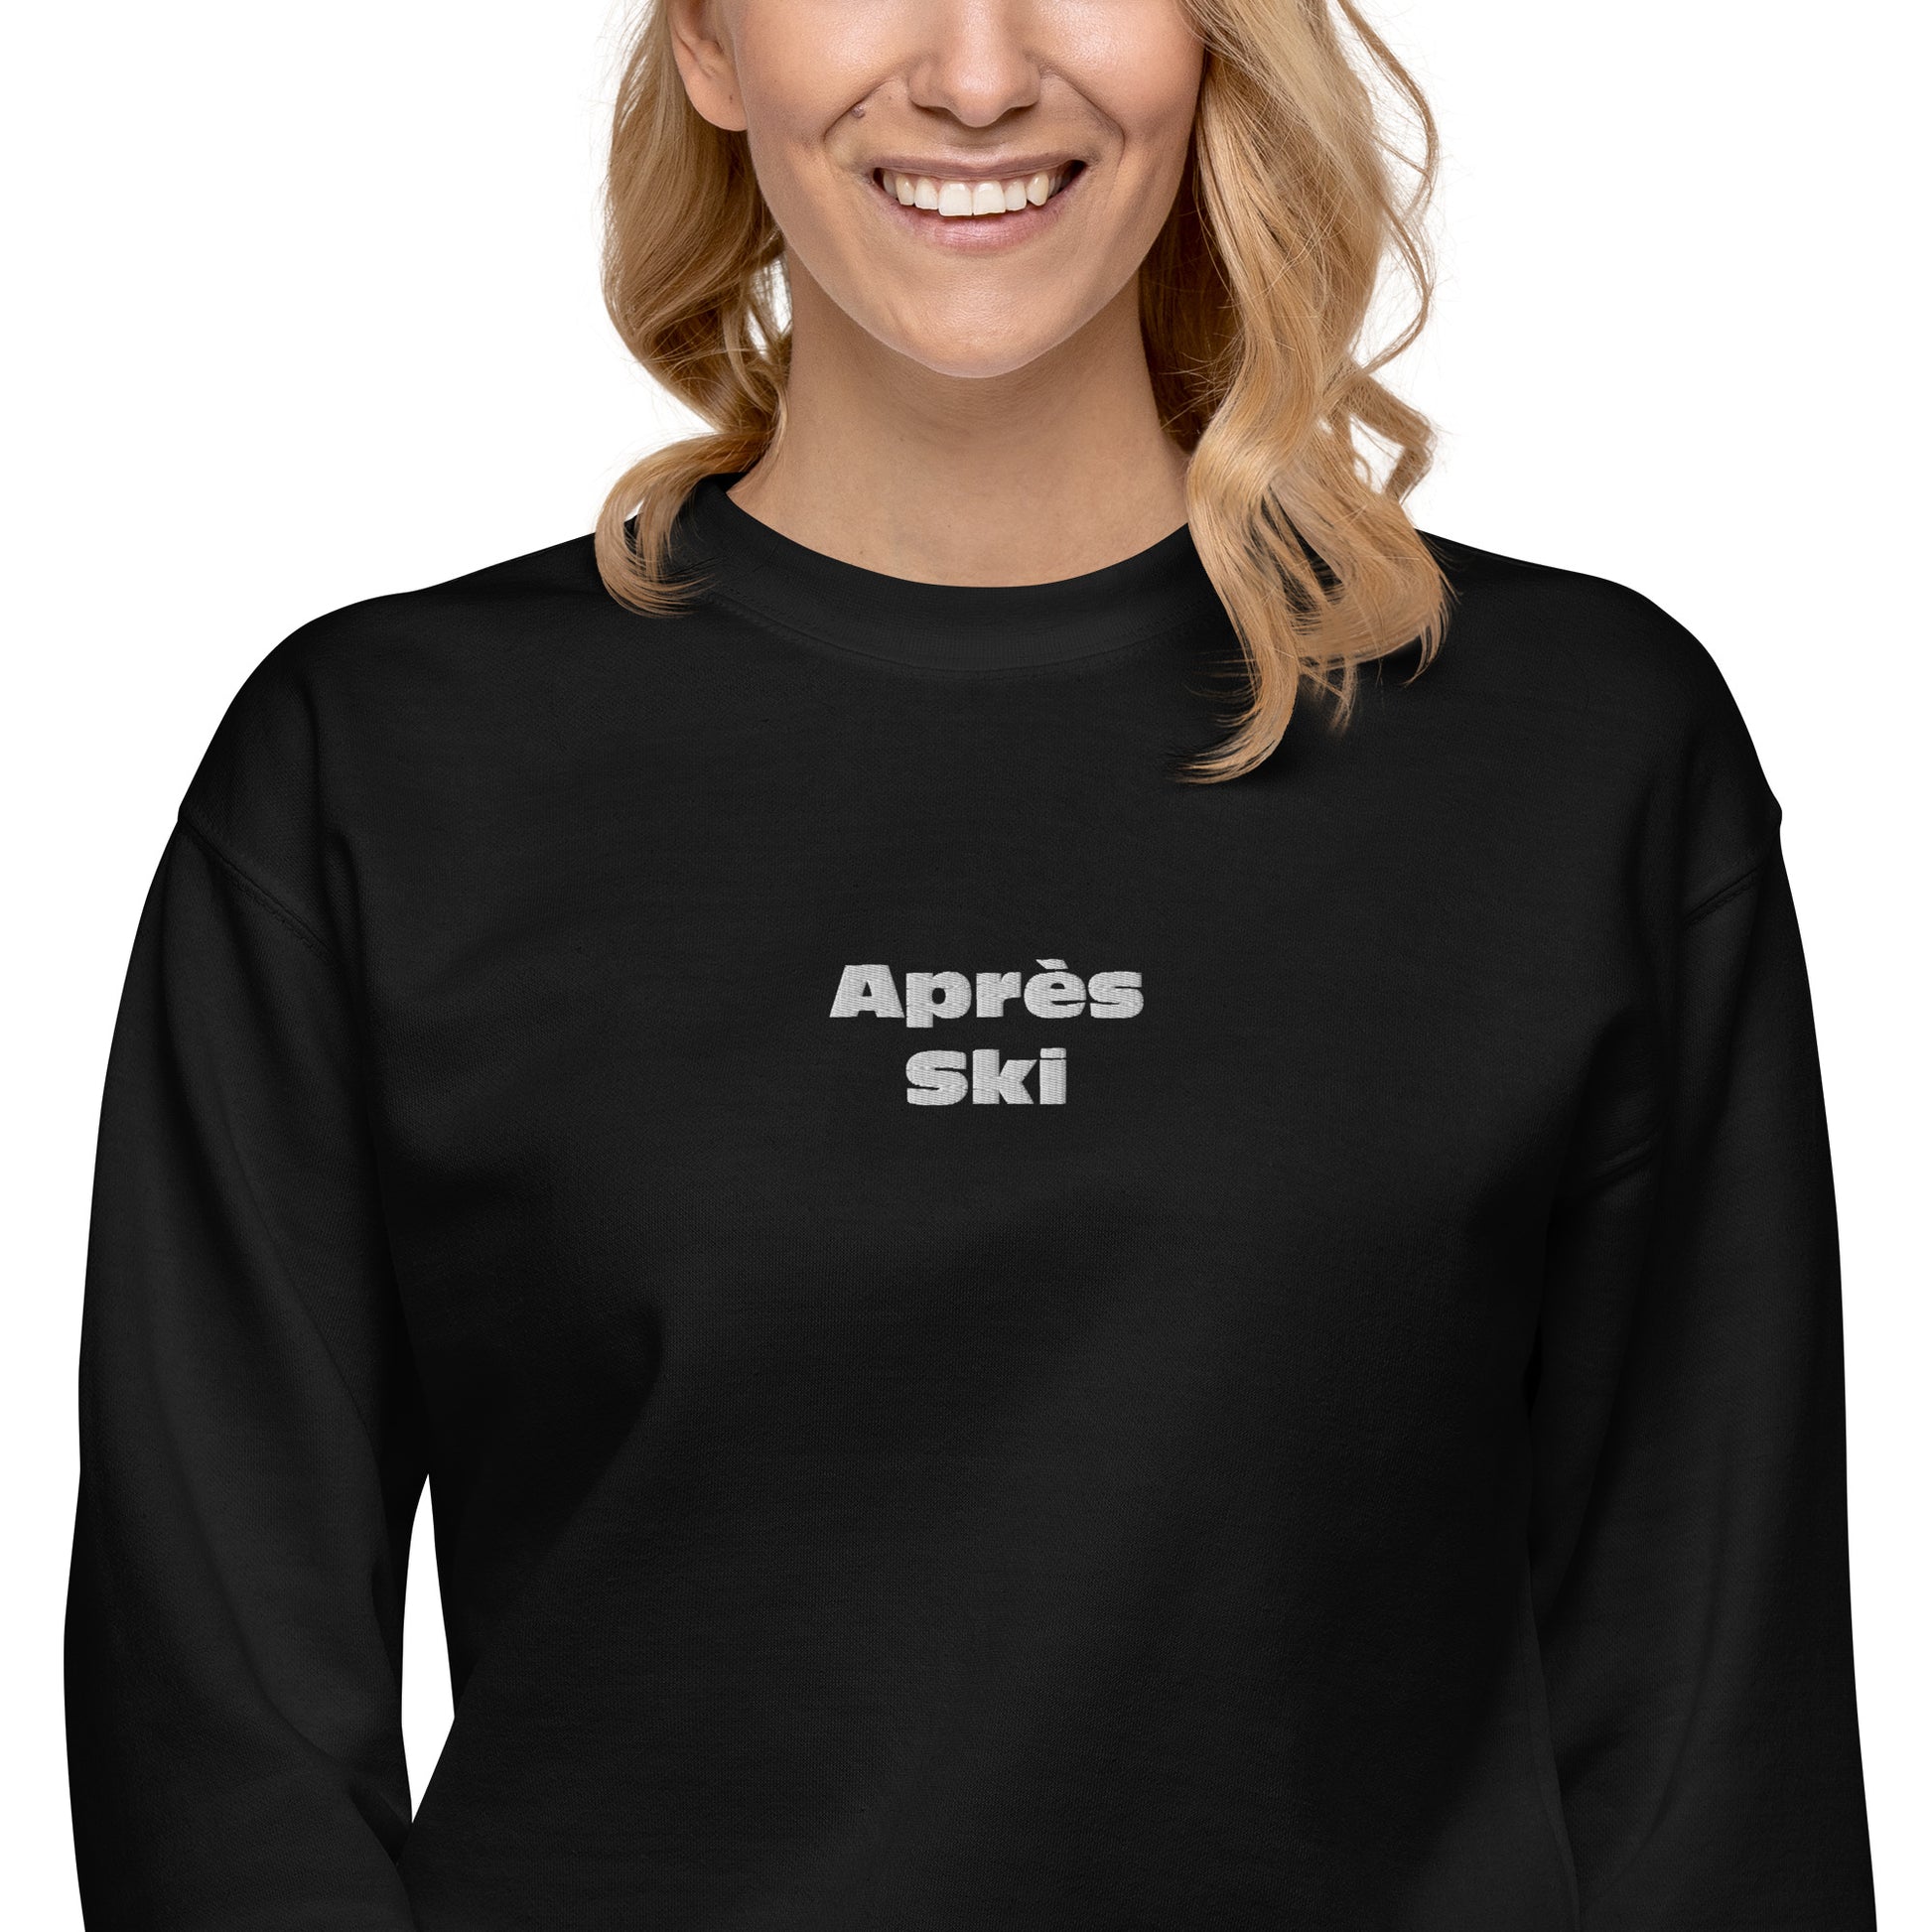 Apres Ski Embroidered Sweatshirt, Vintage Retro Sweater Embroidery Men Women Weekend Pullover Clothing Top Club Starcove Fashion